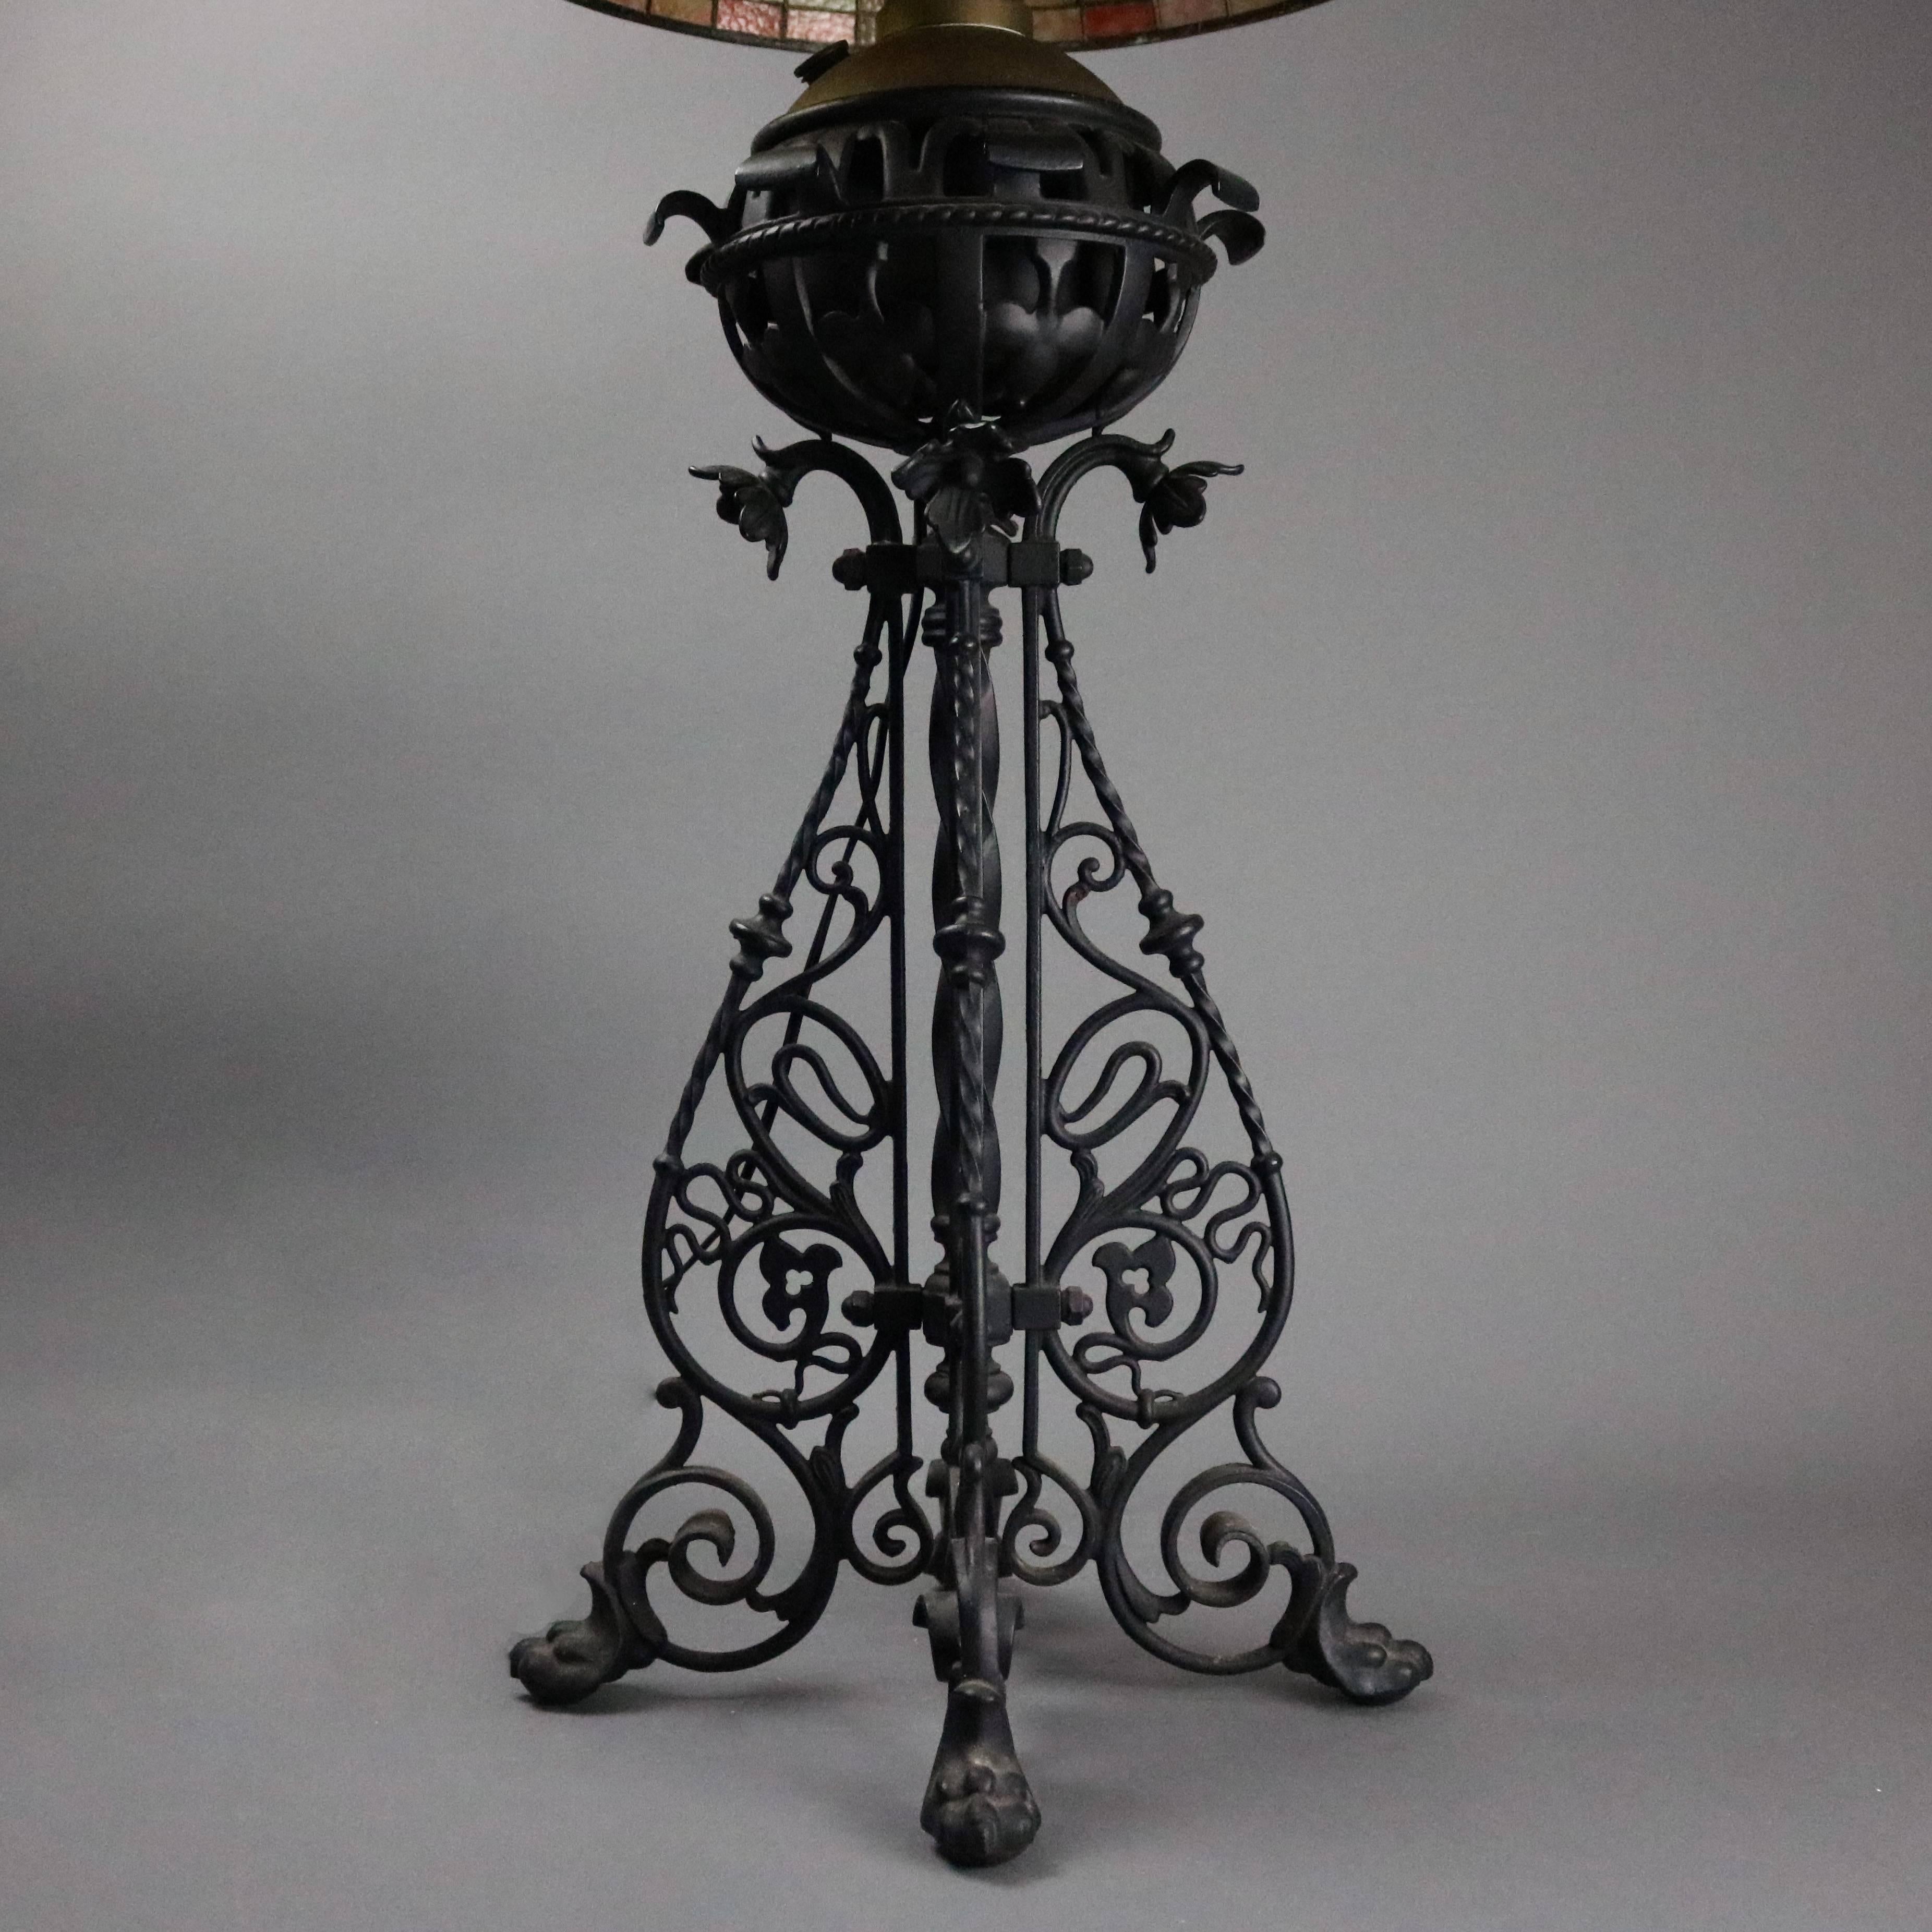 20th Century Arts & Crafts Bradley Hubbard Style Leaded Glass and Iron Table Lamp, circa 1910